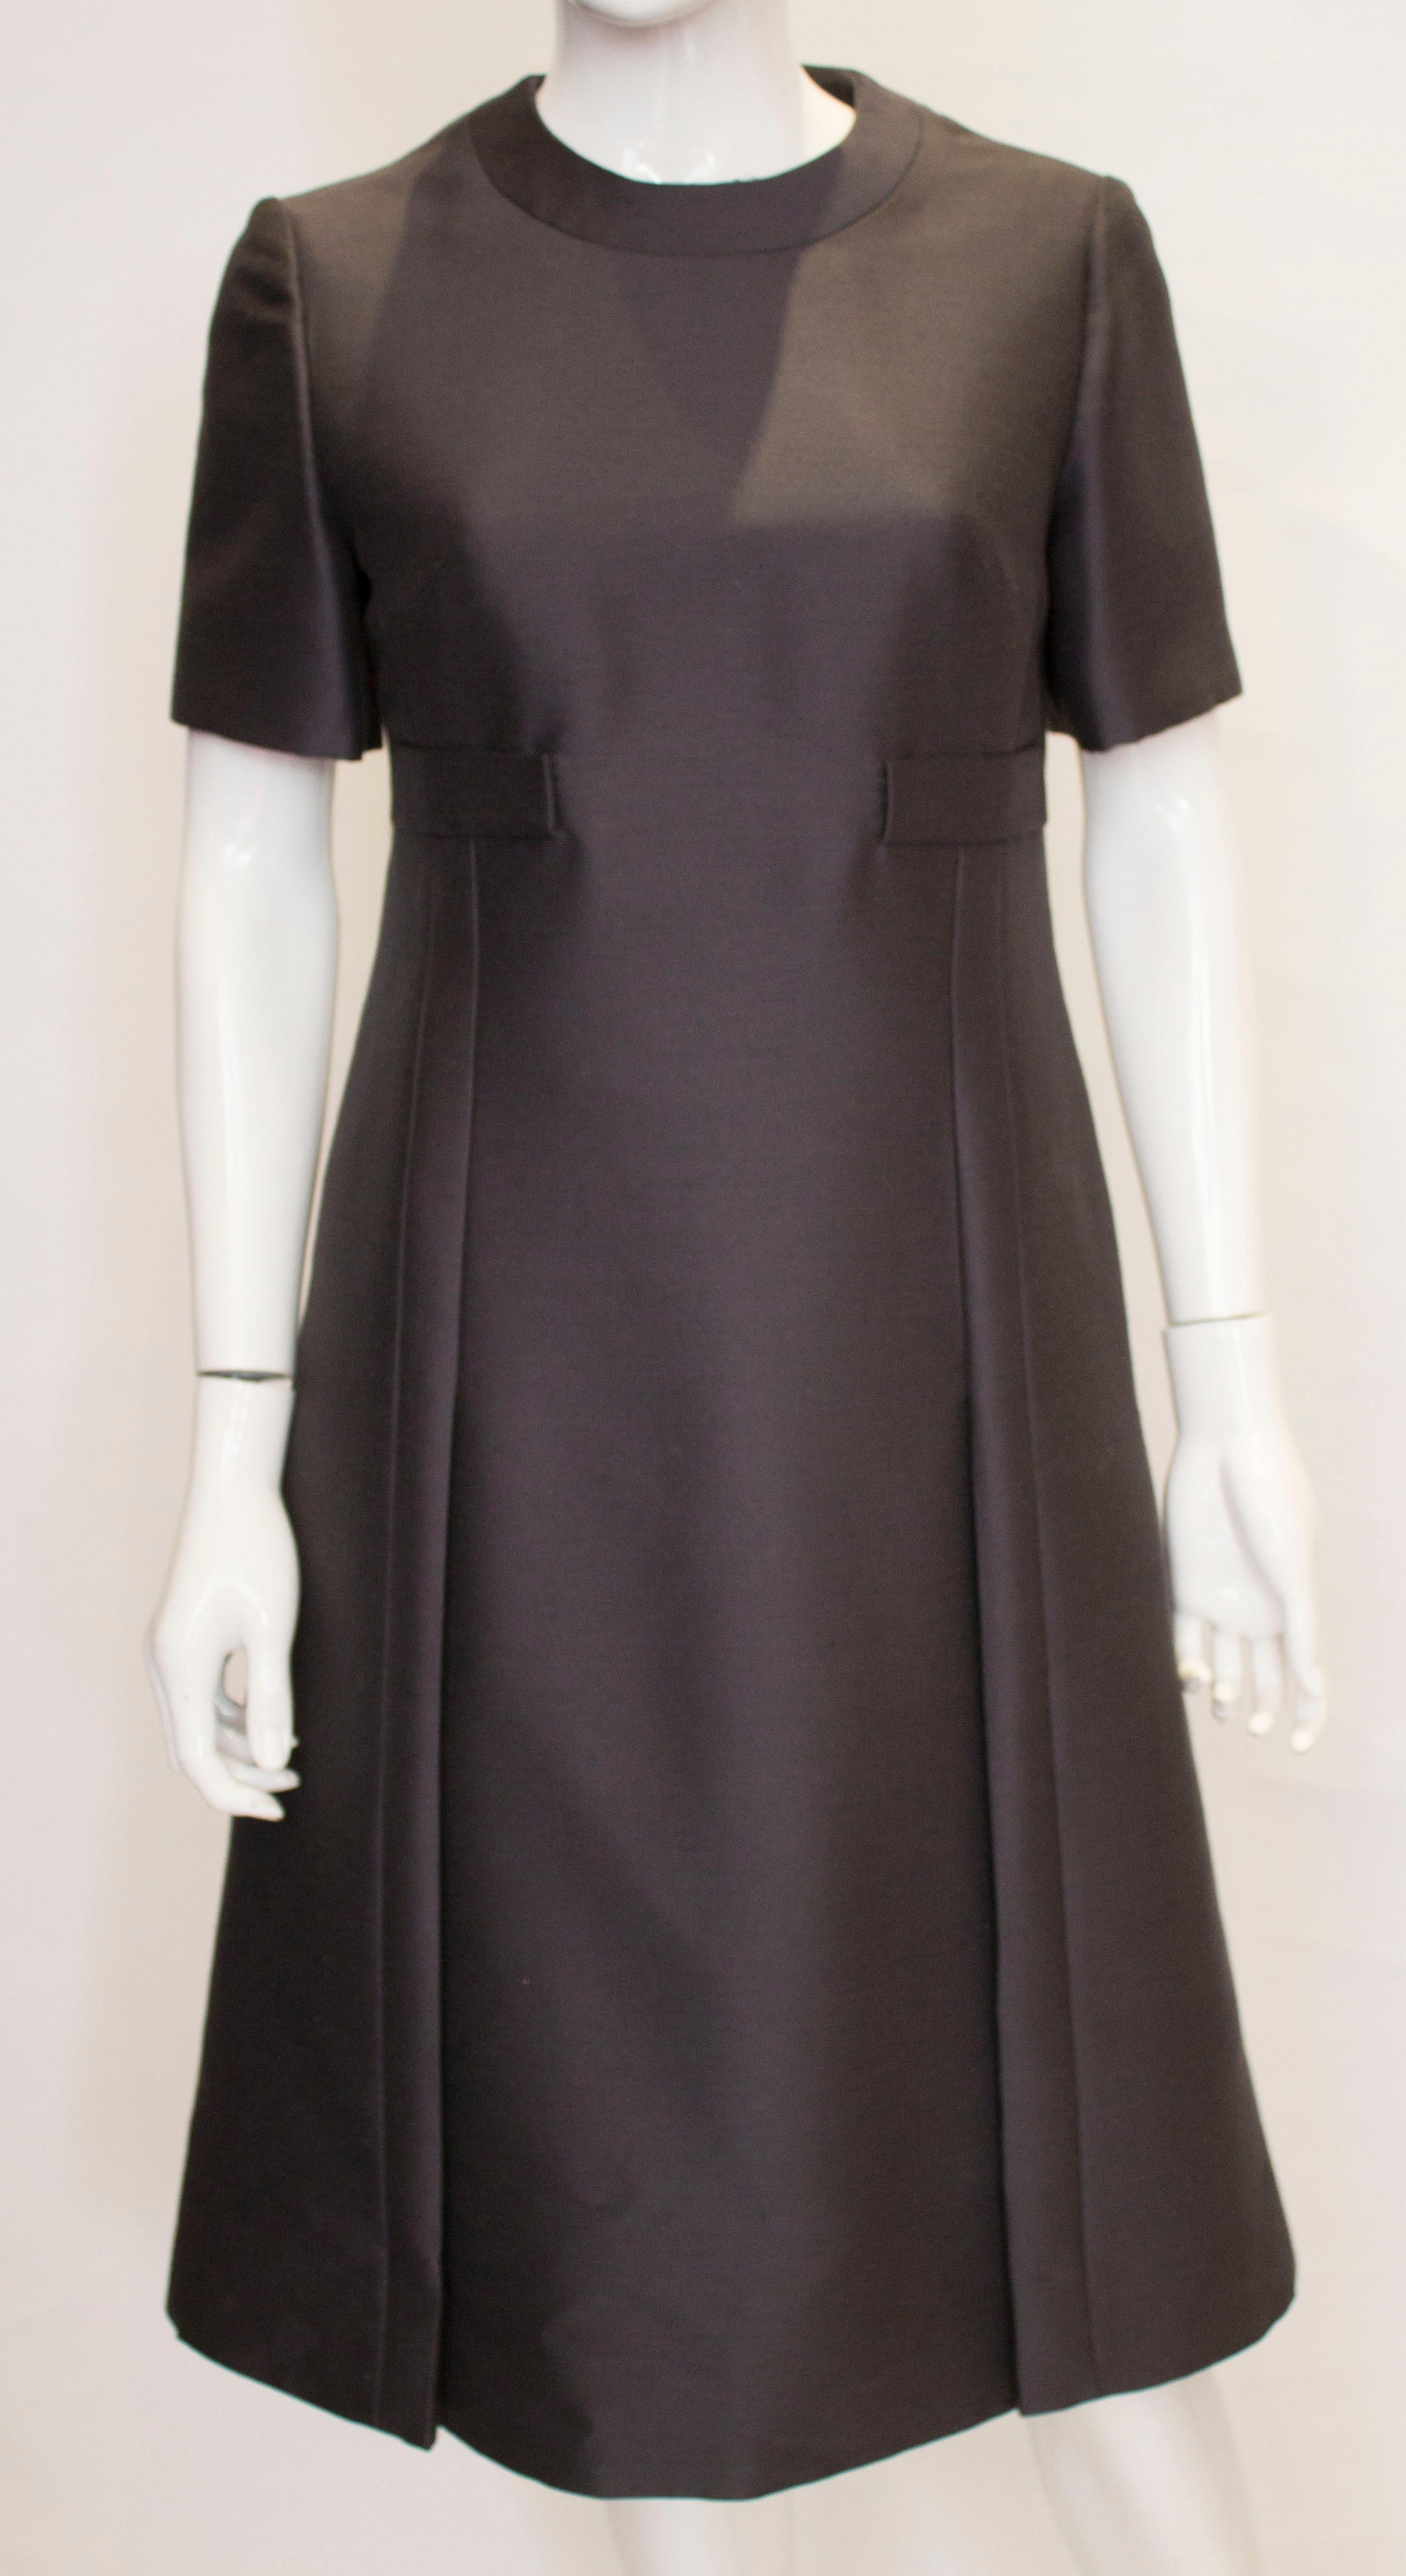 An elegant power dressing outfit by Jean Patou. In a steel grey colour , the dress has a round collar, flare detail at the front , short sleeves and a central back zip.
The coat has elbow length sleeves , a drop collar detail , six button front